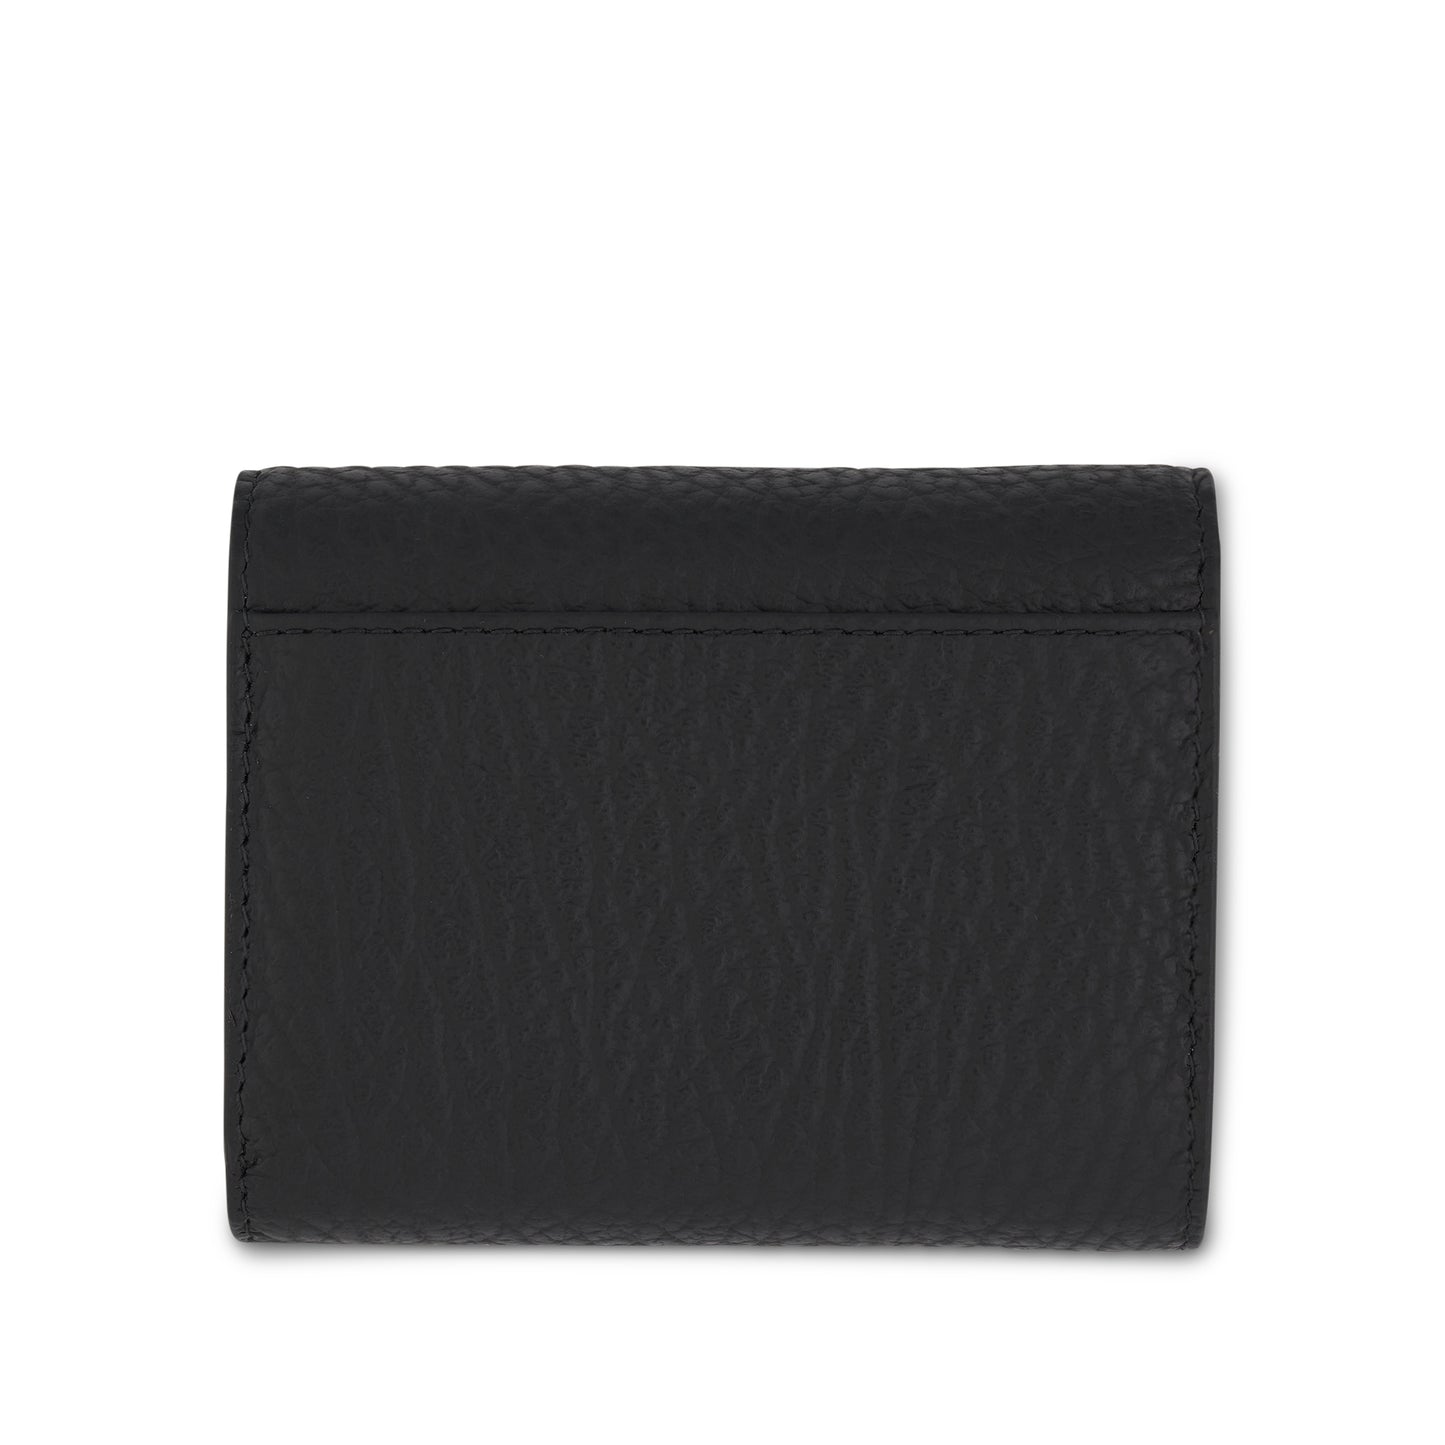 Four Stitches Tri Fold Wallet in Black